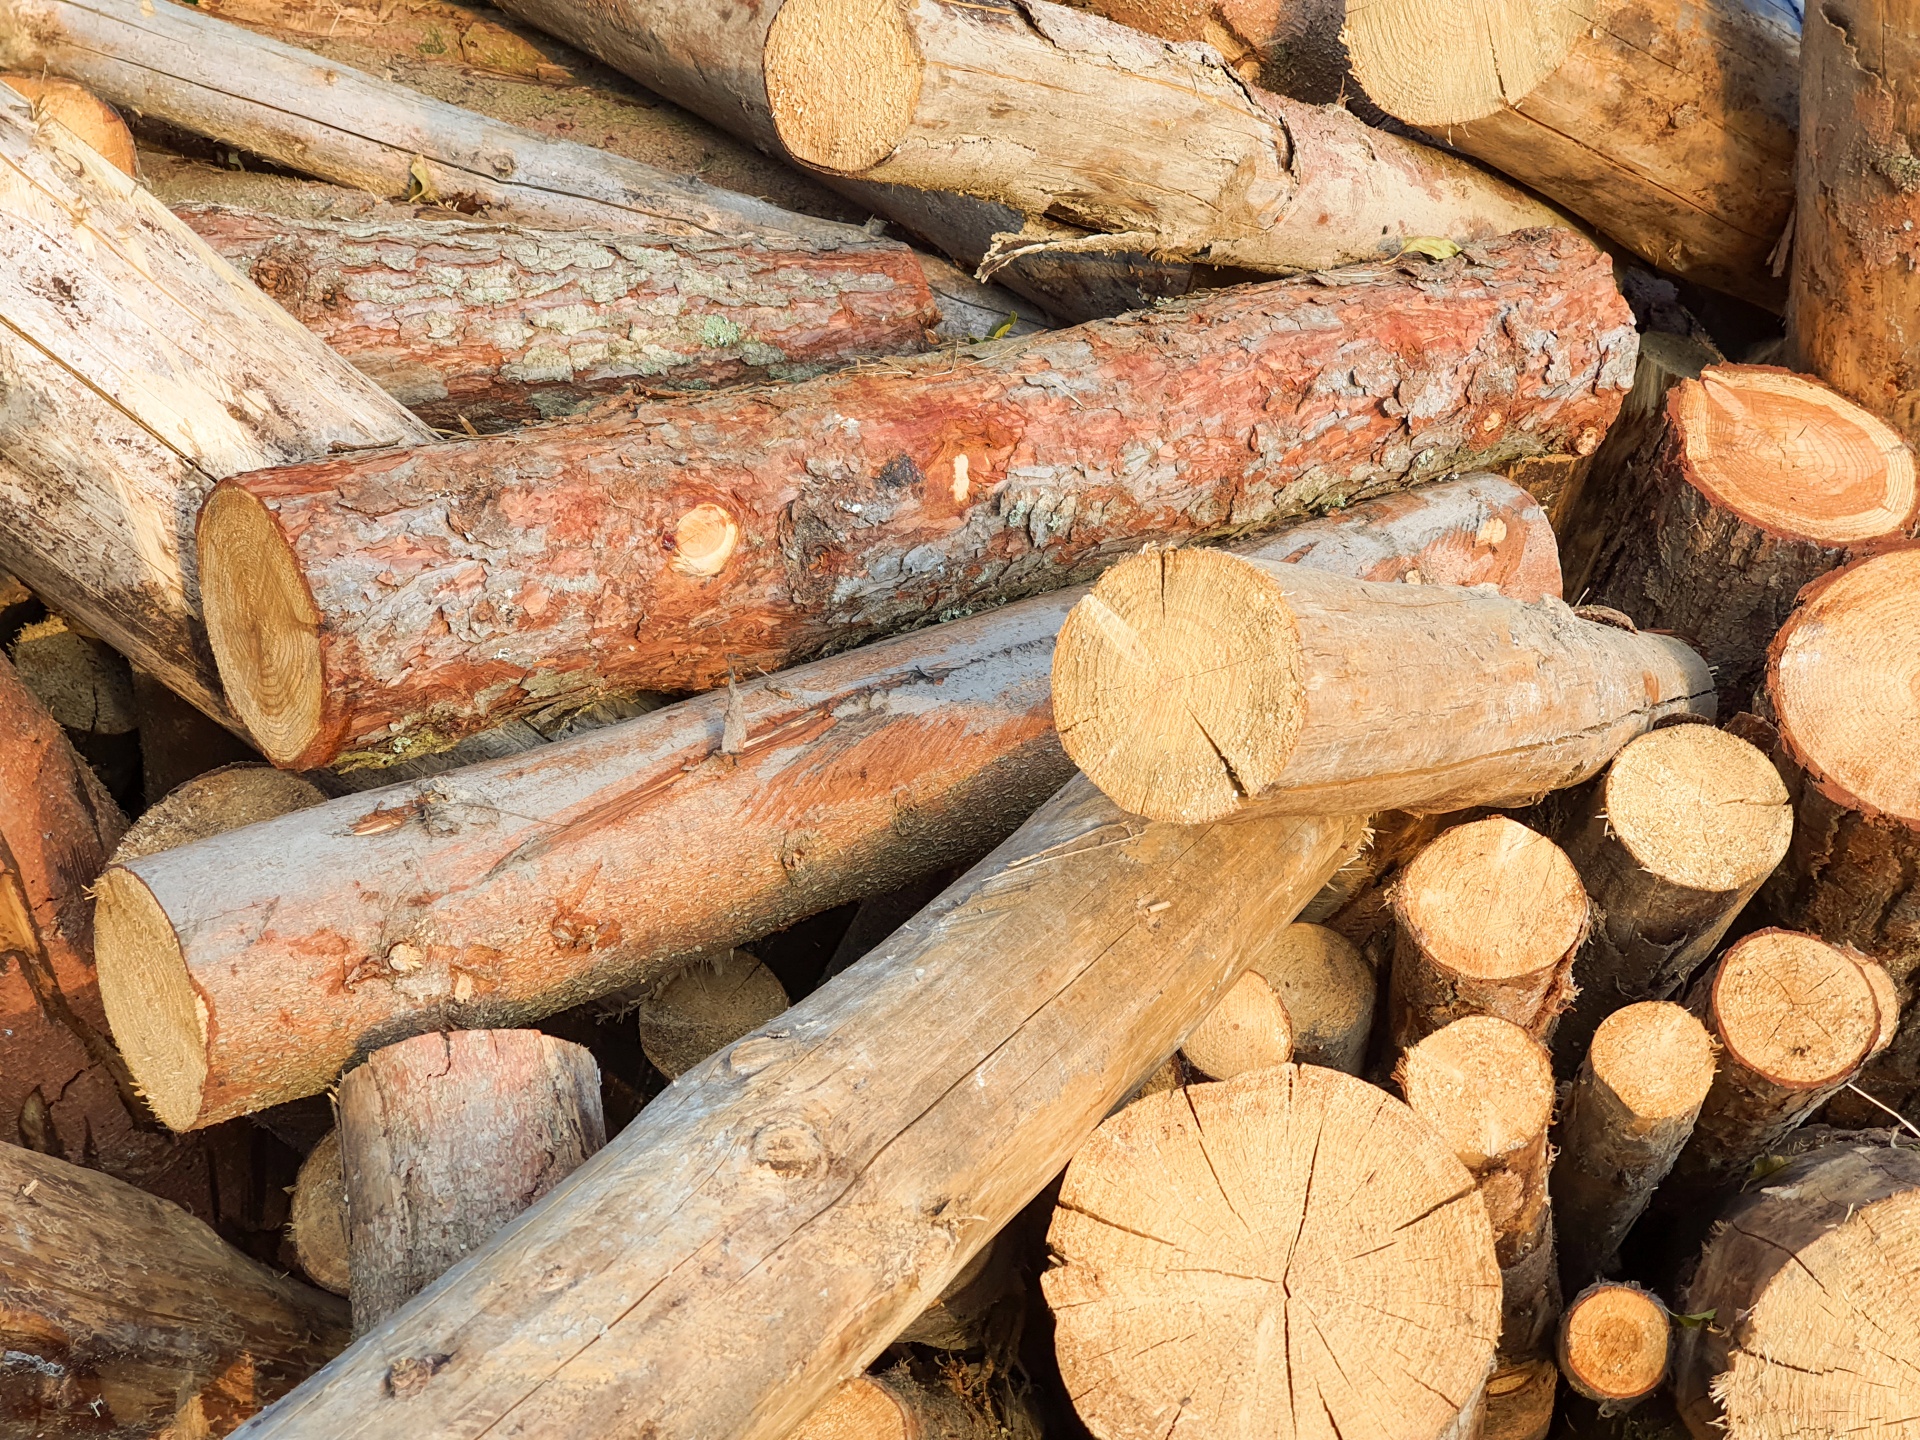 Assorted pile of wooden logs